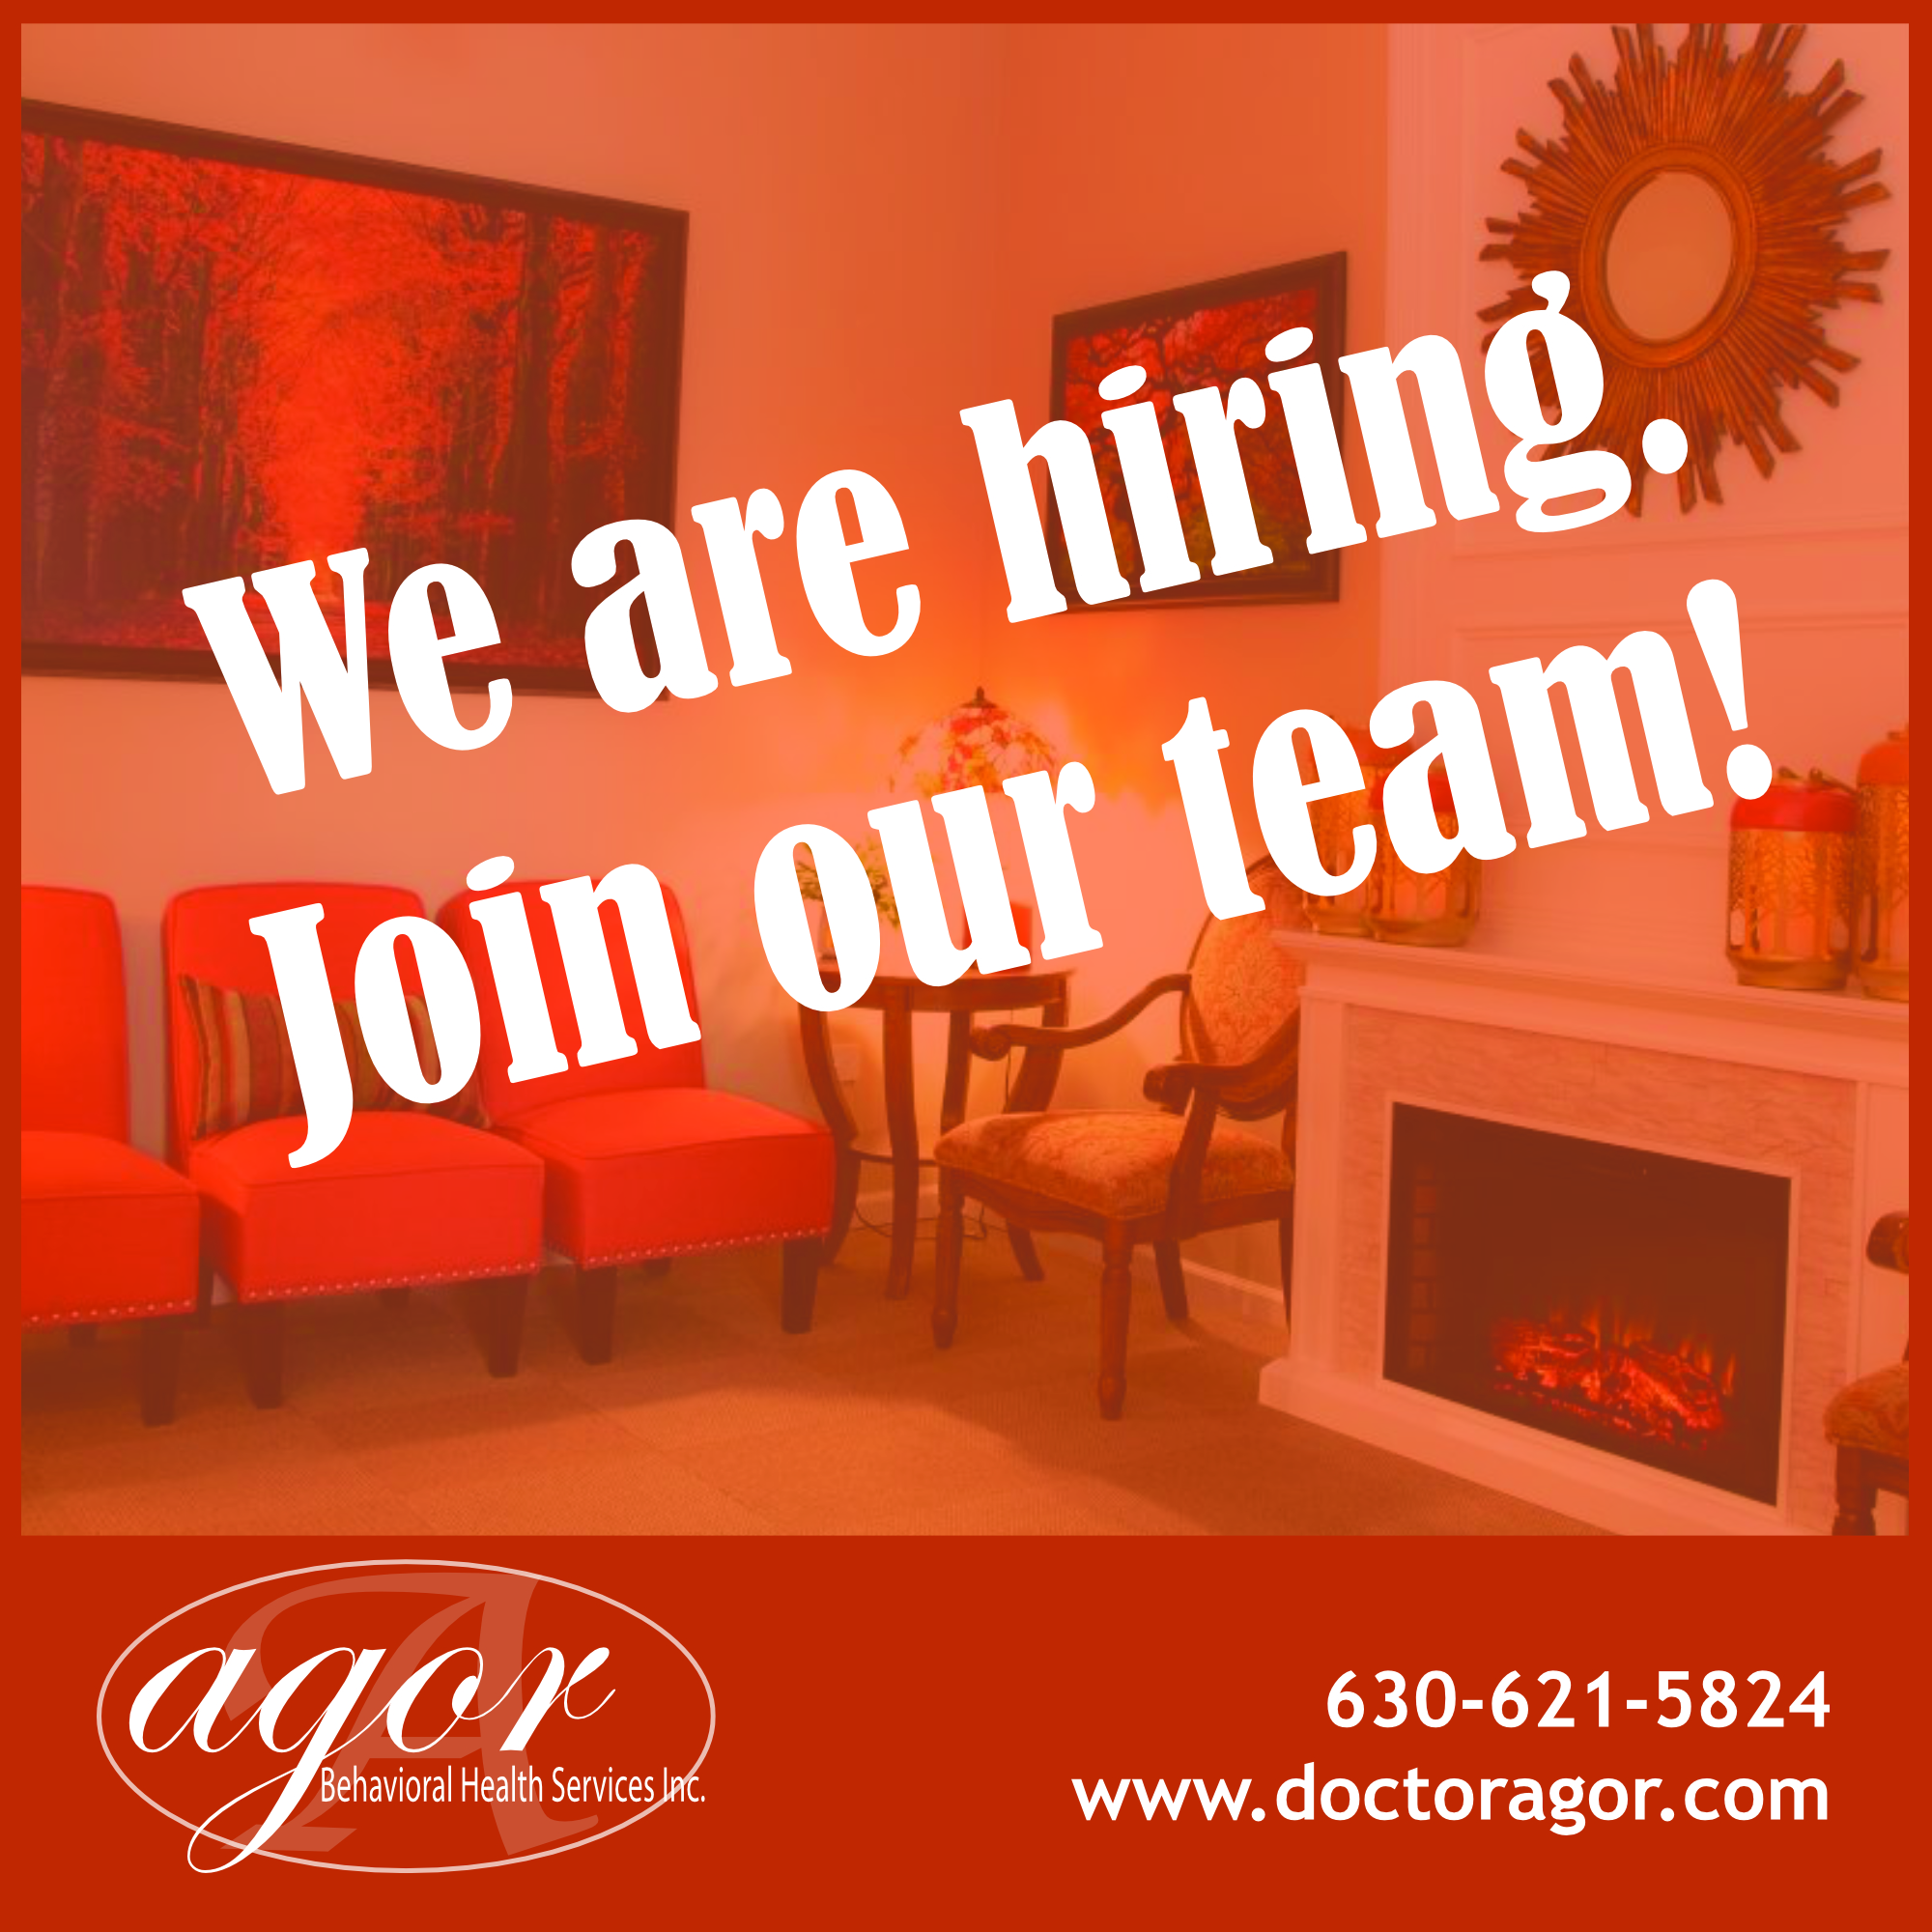 We are hiring. Join our team!